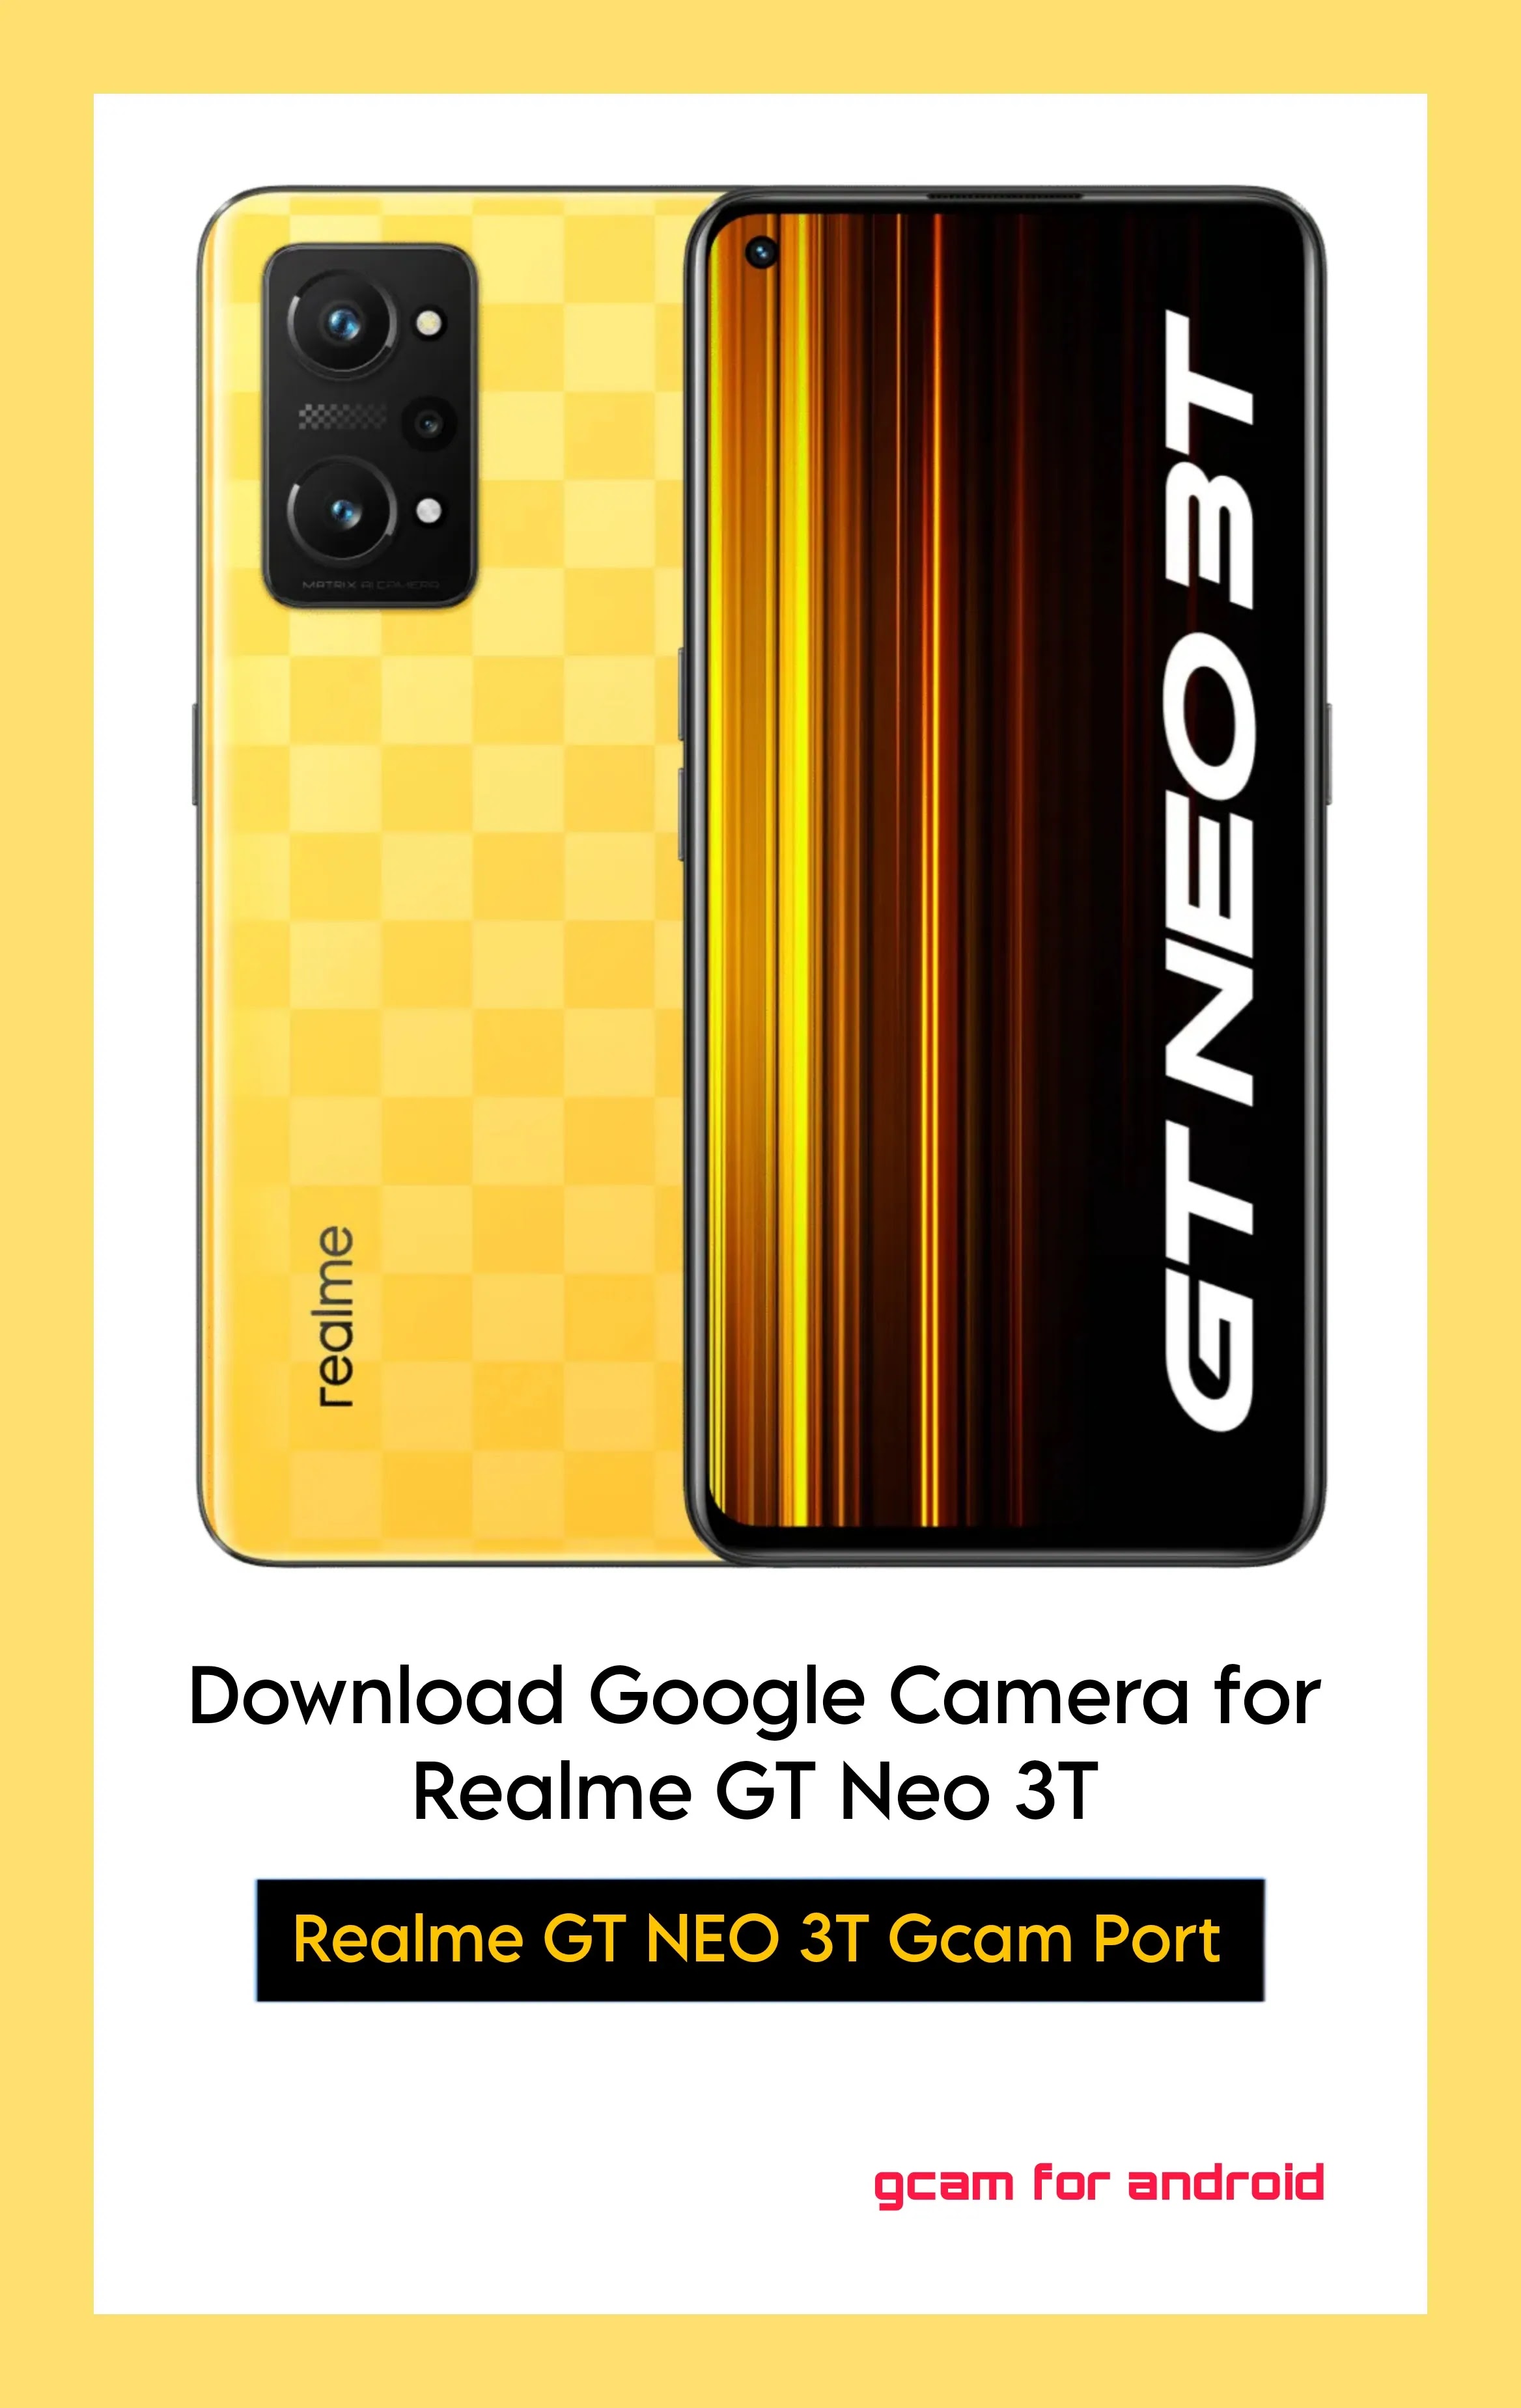 Download Gcam for Realme GT NEO 3T